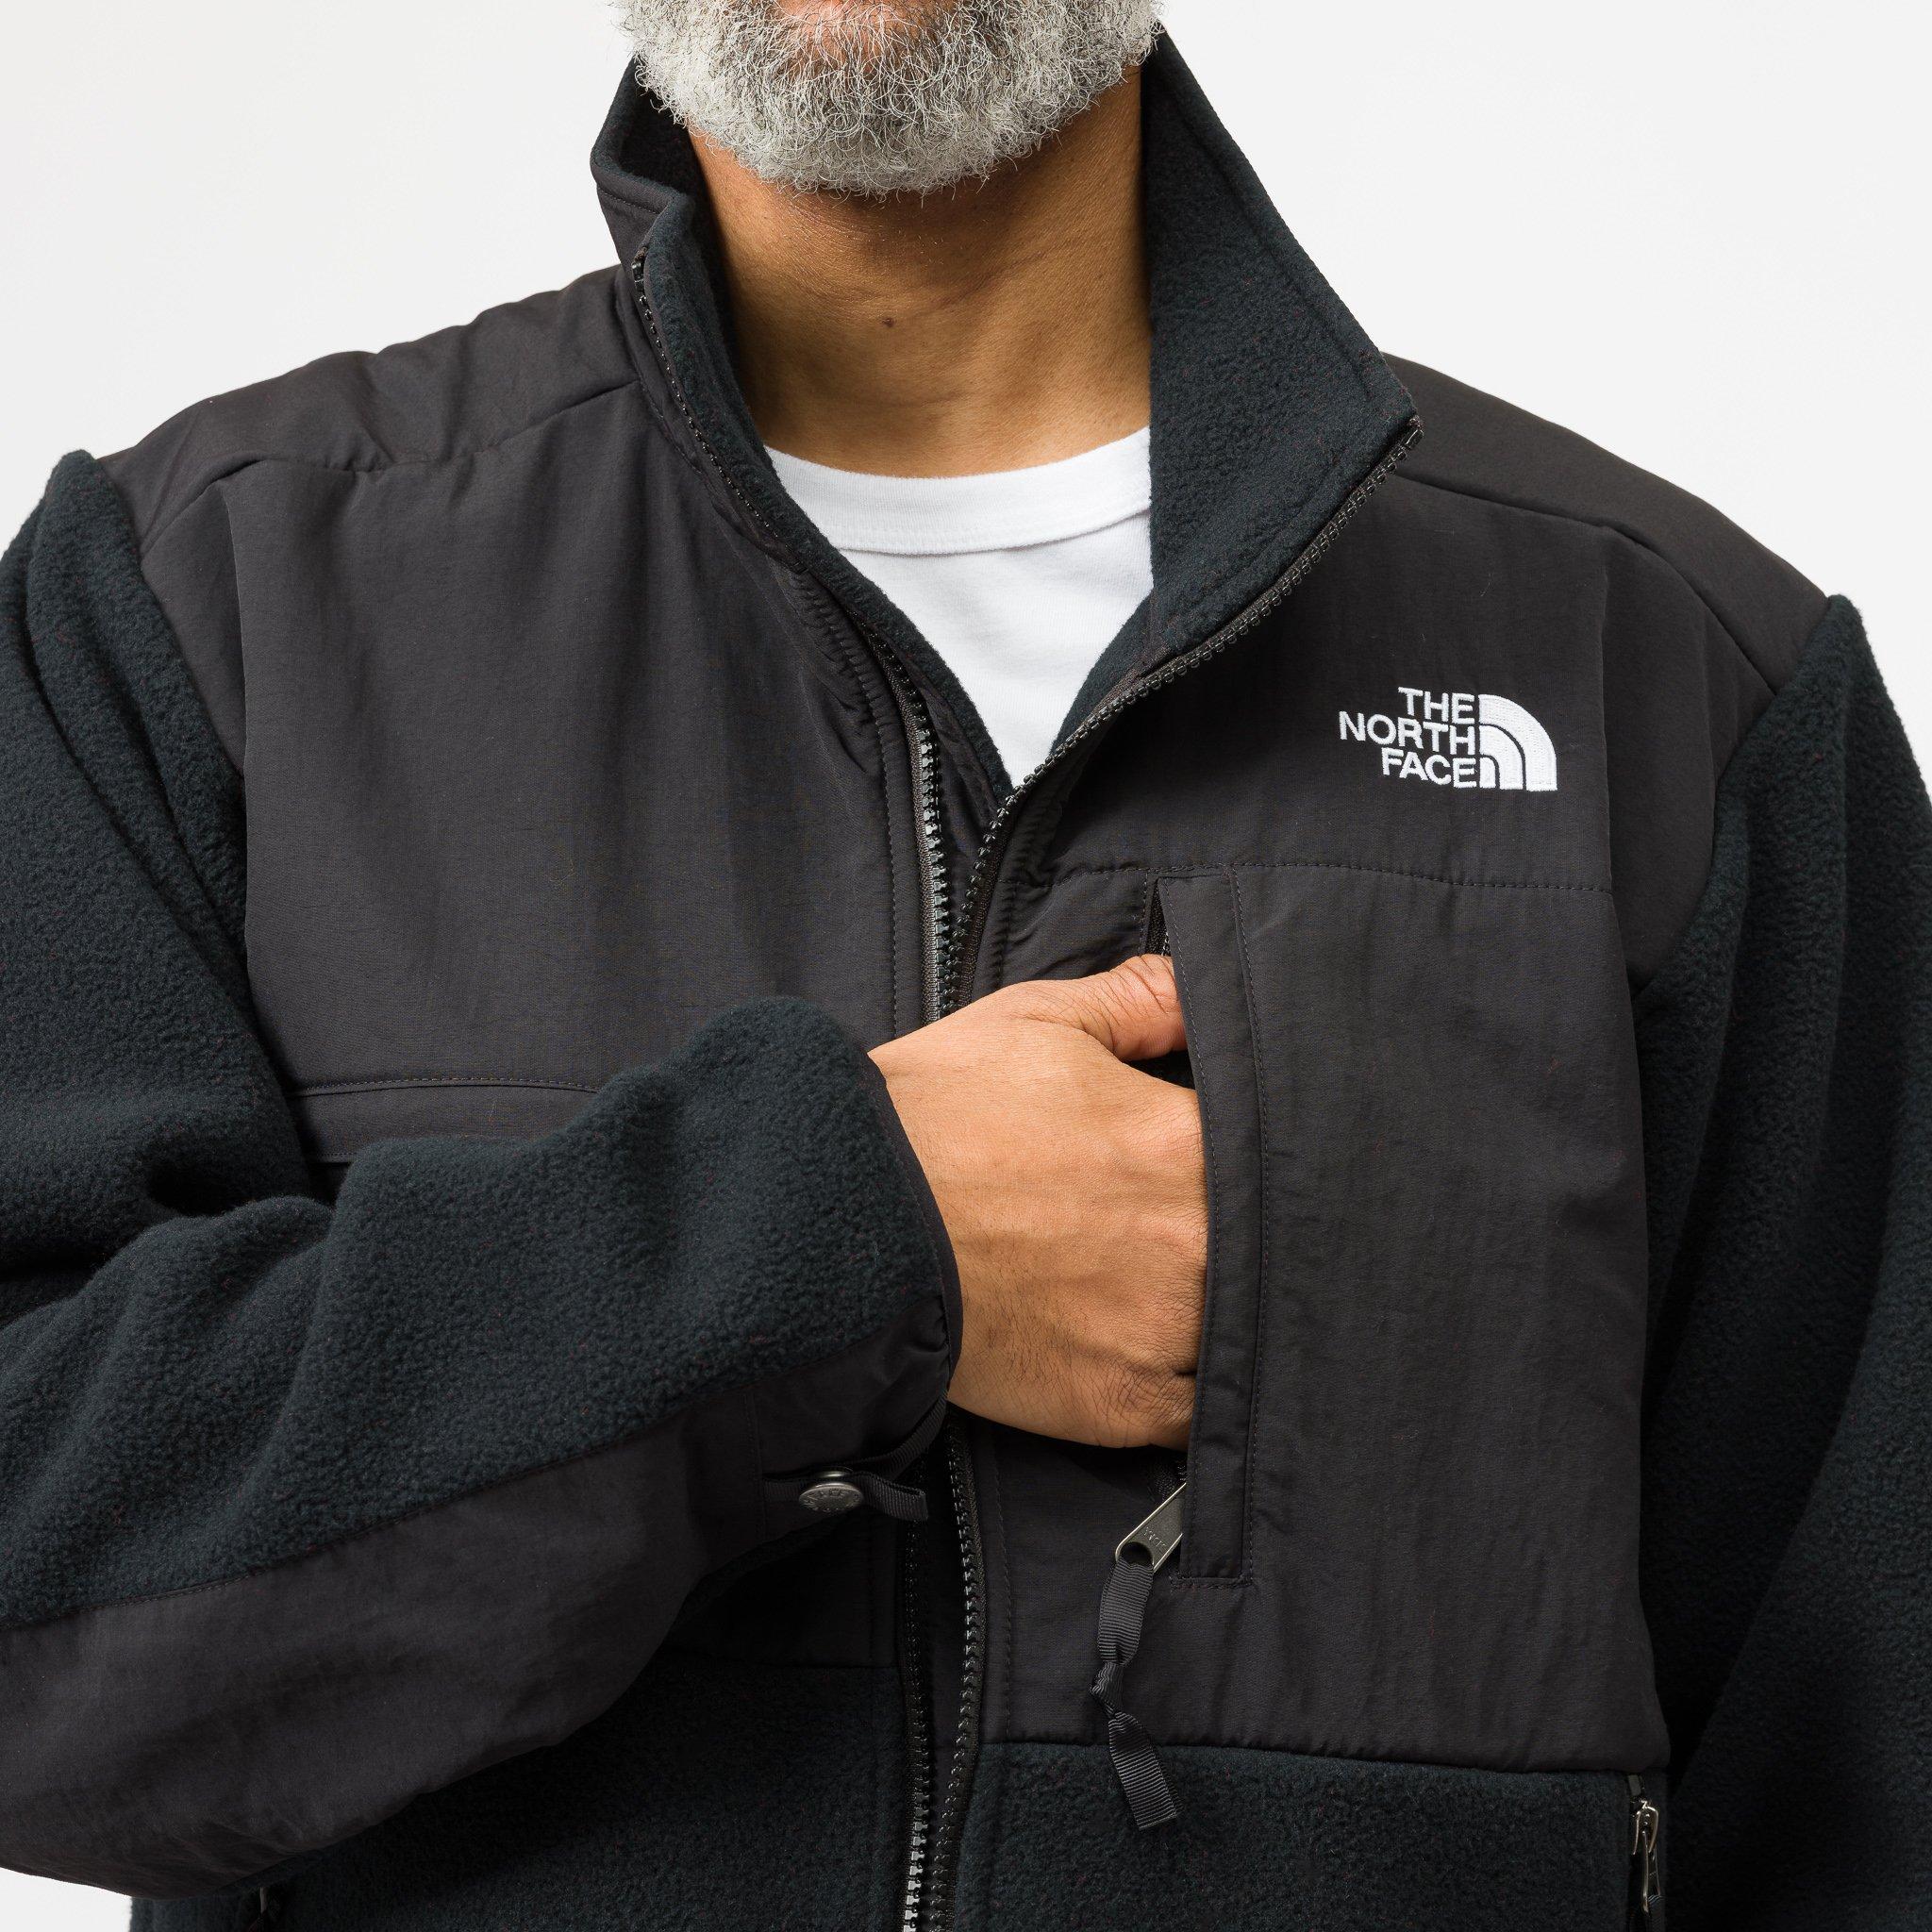 The North Face Synthetic 95 Retro Denali Jacket in Black for Men - Save 72%  - Lyst